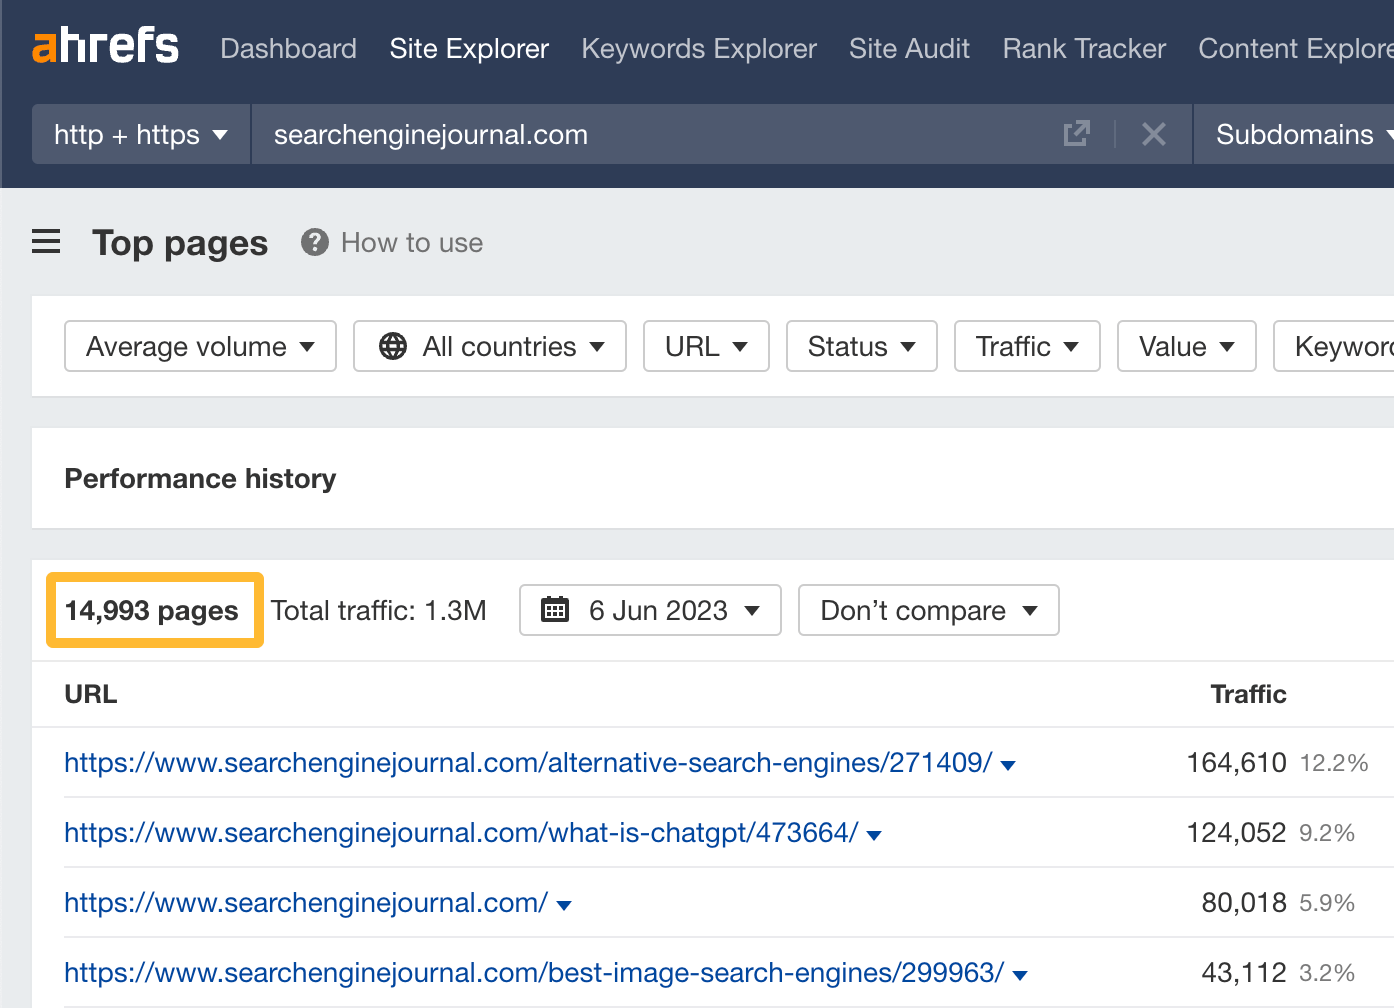 Search Engine Journal has published almost 15,000 pages, according to Ahrefs' Site Explorer
